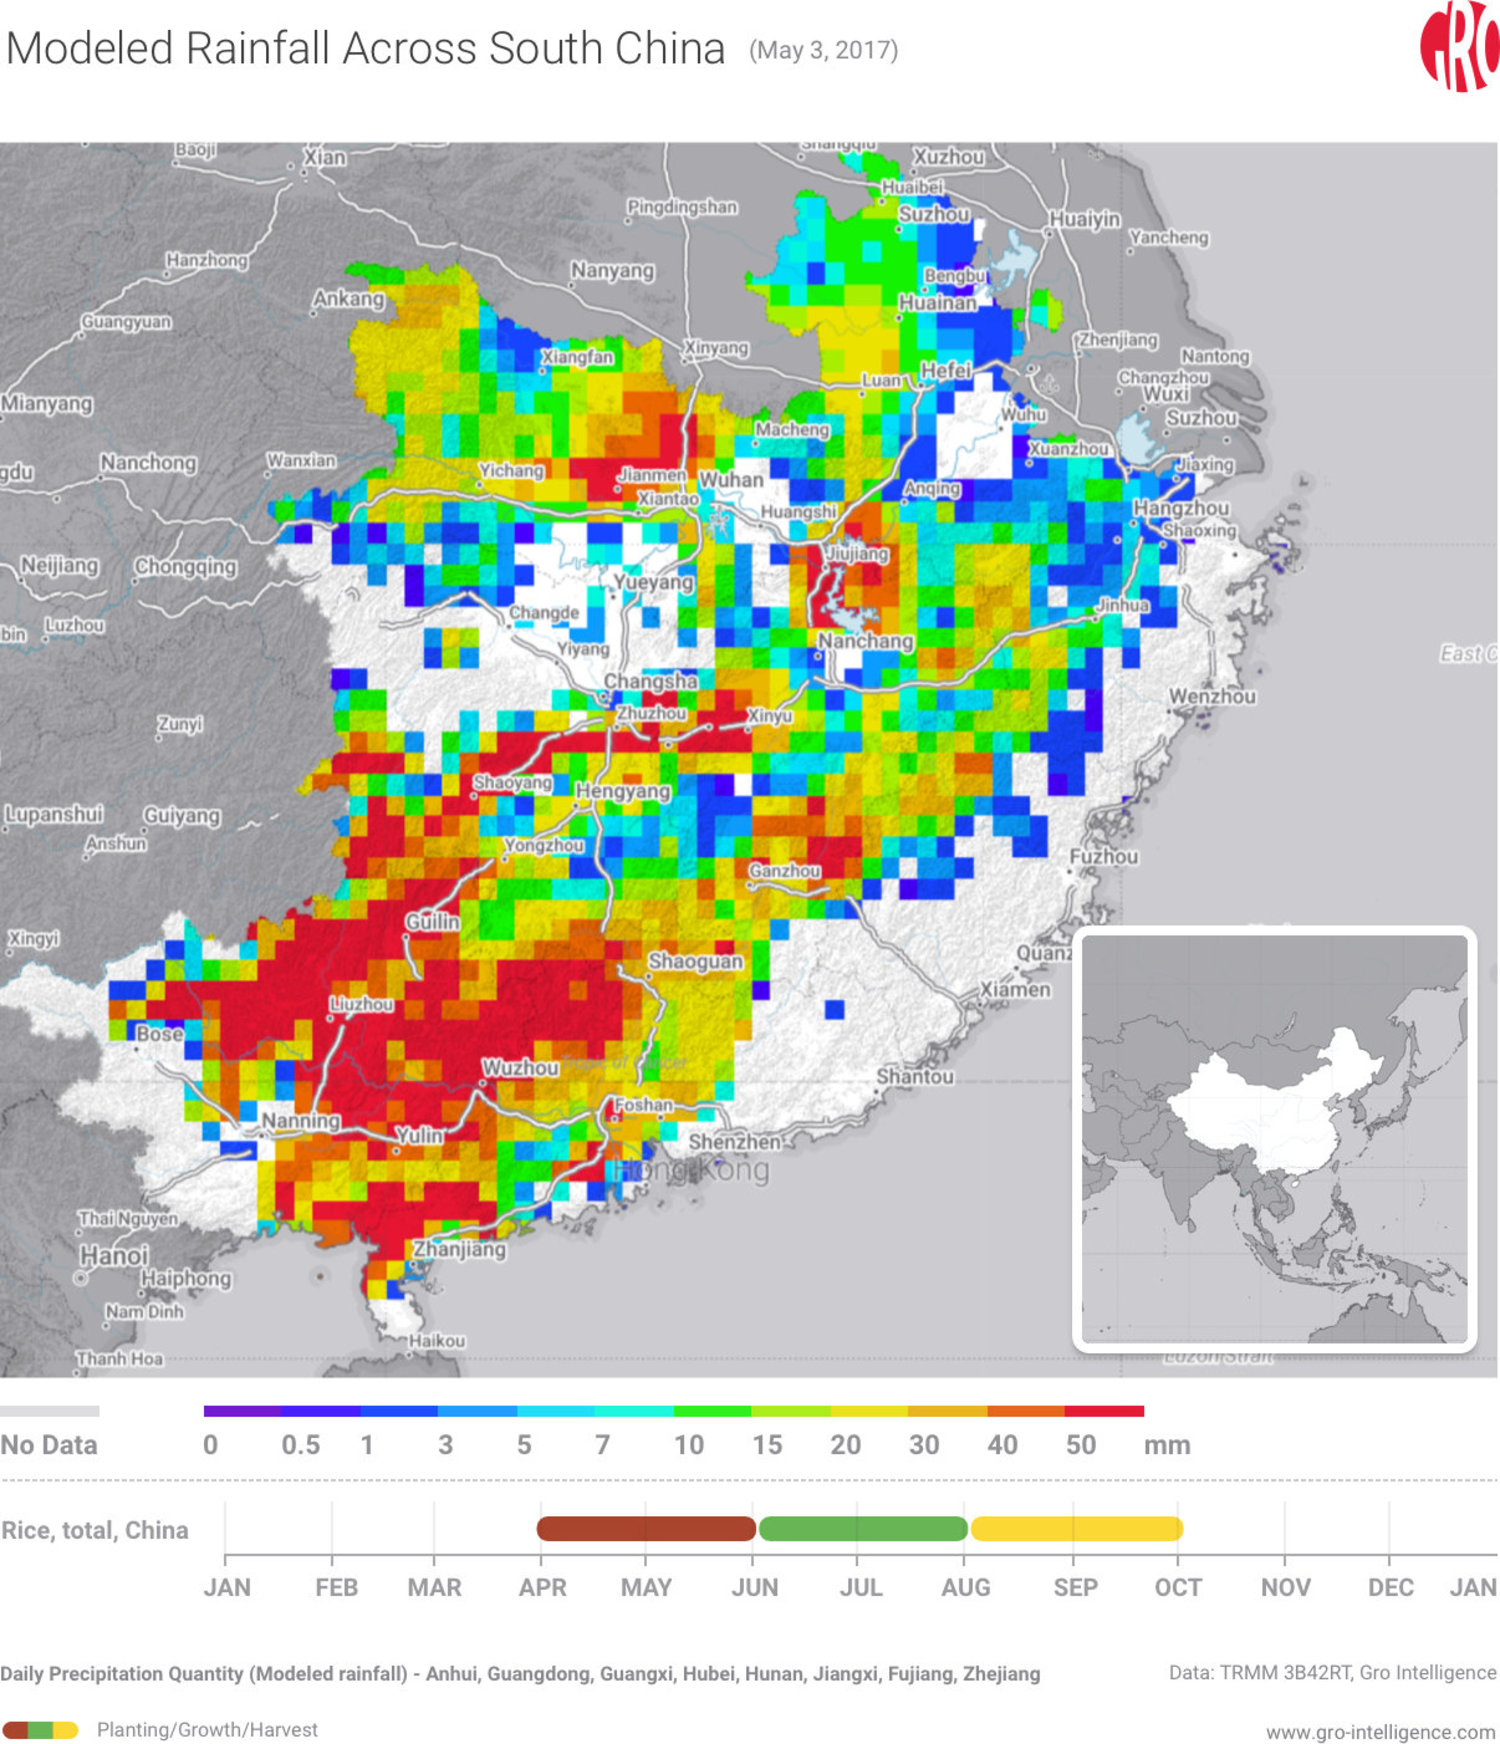 Rainfall in South China